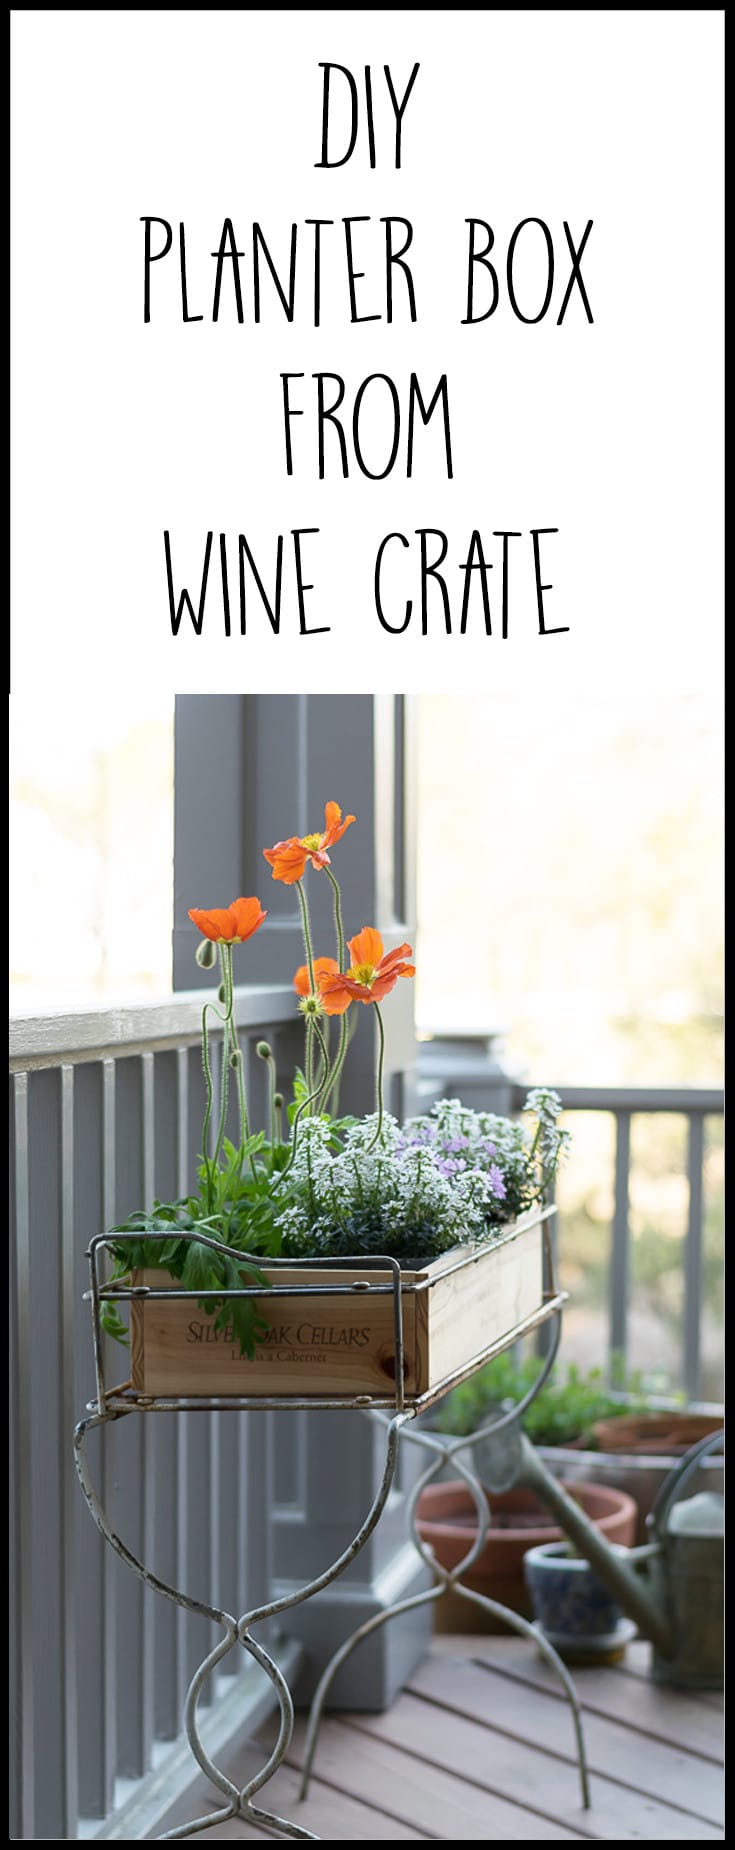 What a great upcycle and repurpose! A wooden wine crate makes a great planter for a container garden.. An easy DIY for porch decor.